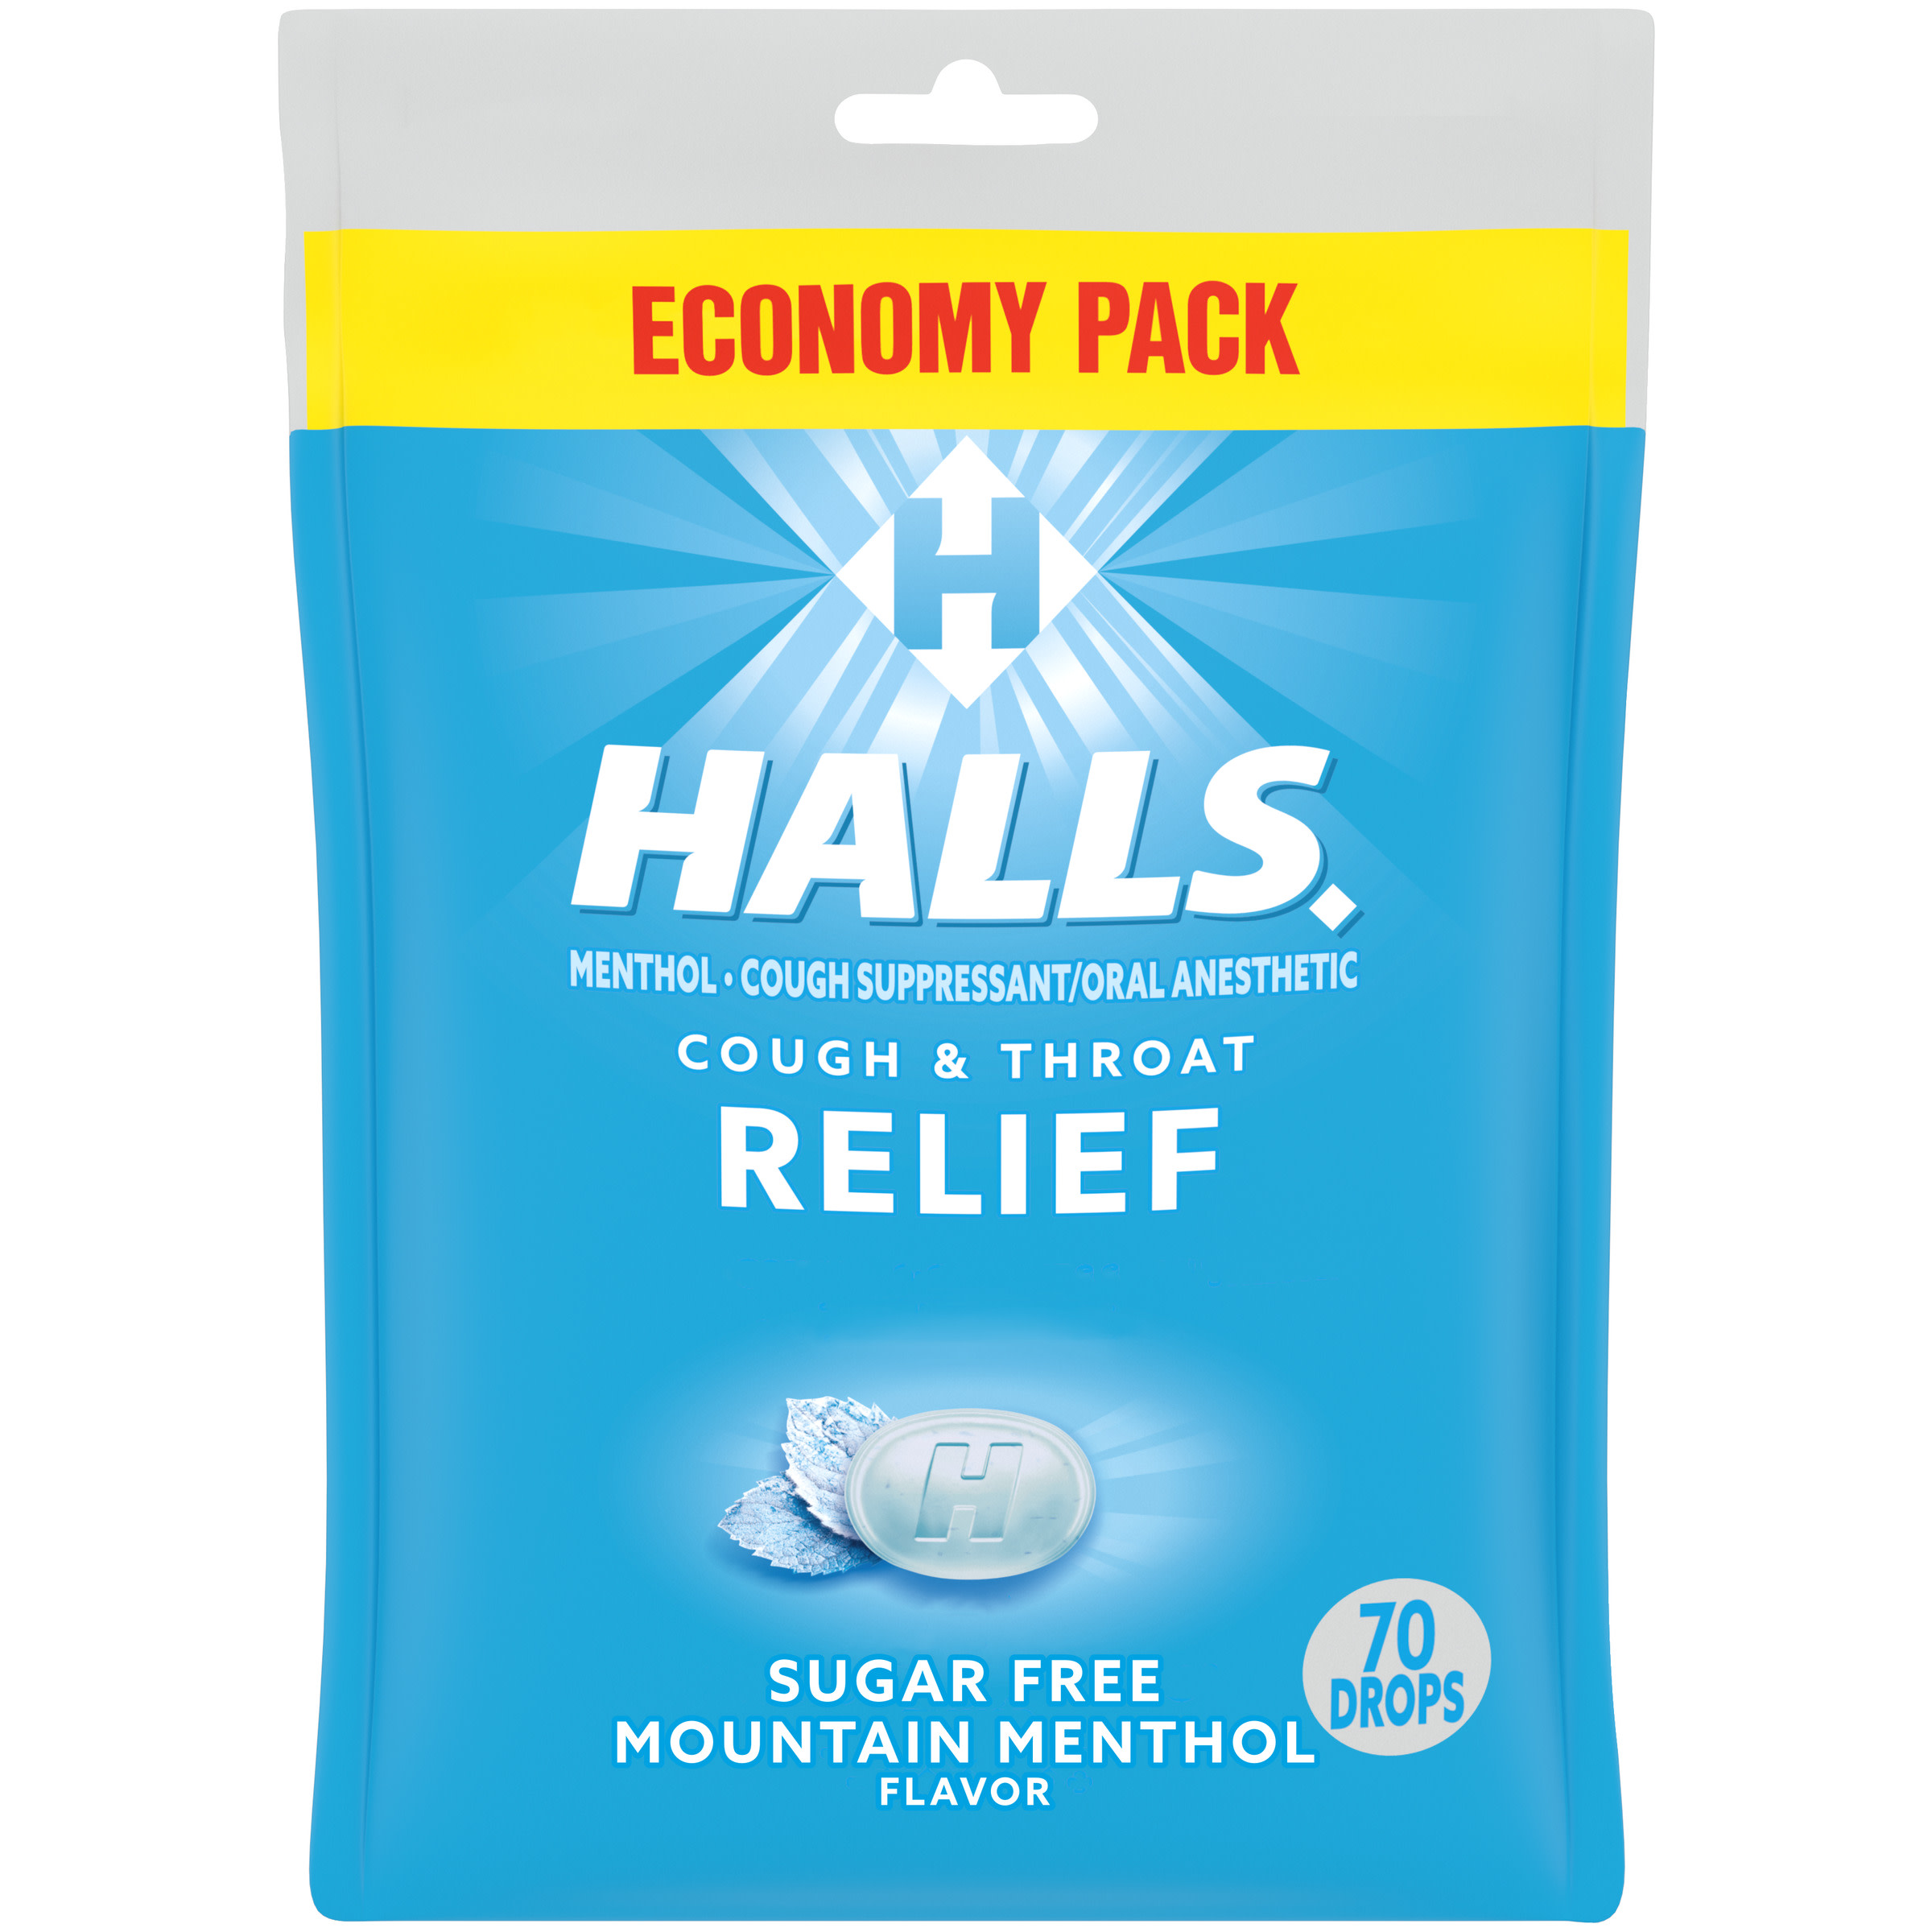 Halls relief mountain menthol sugar free cough drops economy pack 70 drops